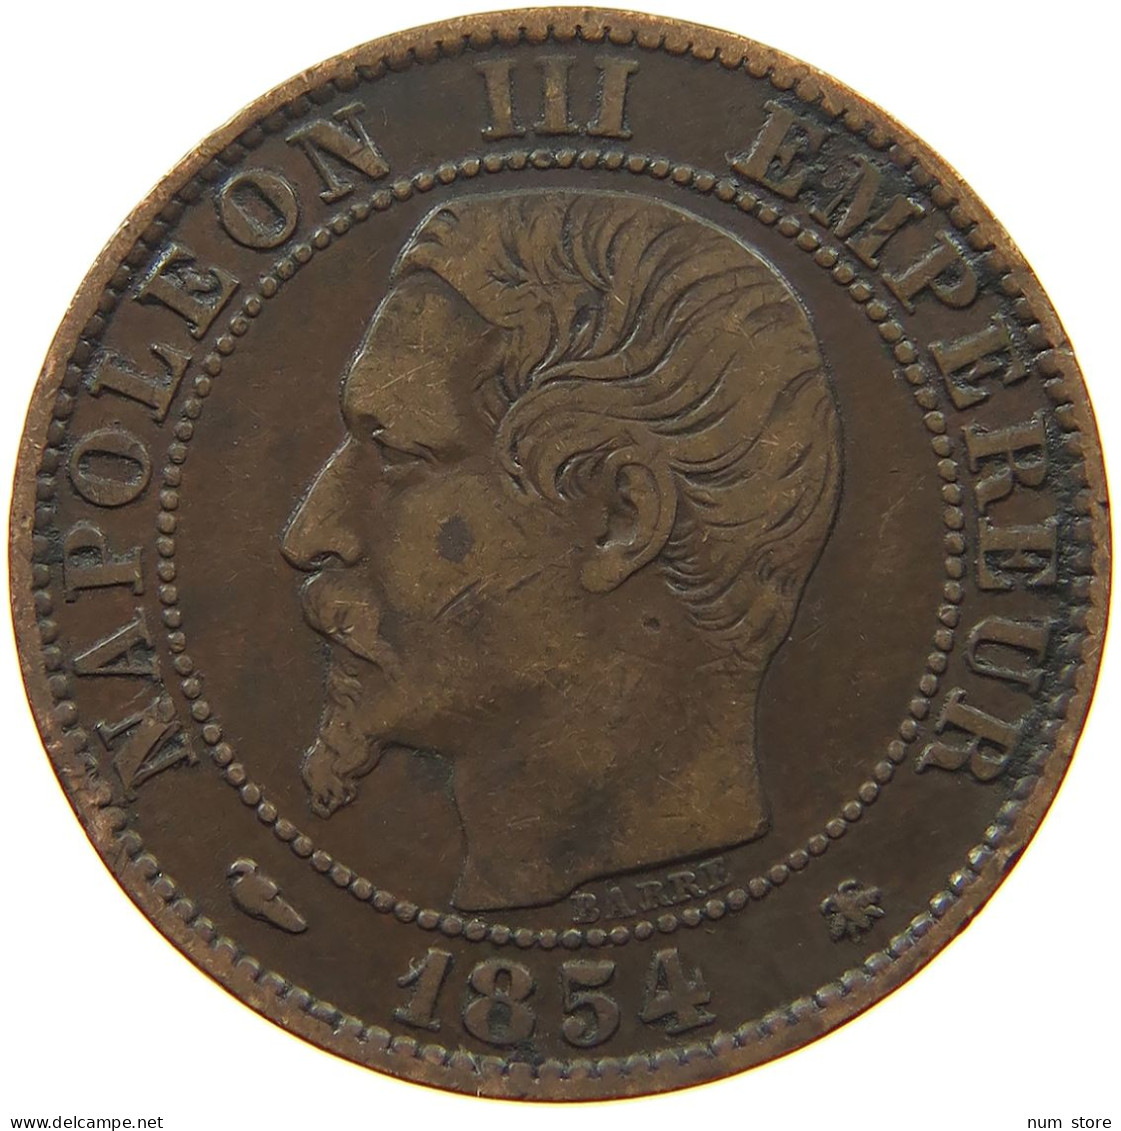 FRANCE 5 CENTIMES 1854 BB Napoleon III. (1852-1870) #s077 0367 - 5 Centimes